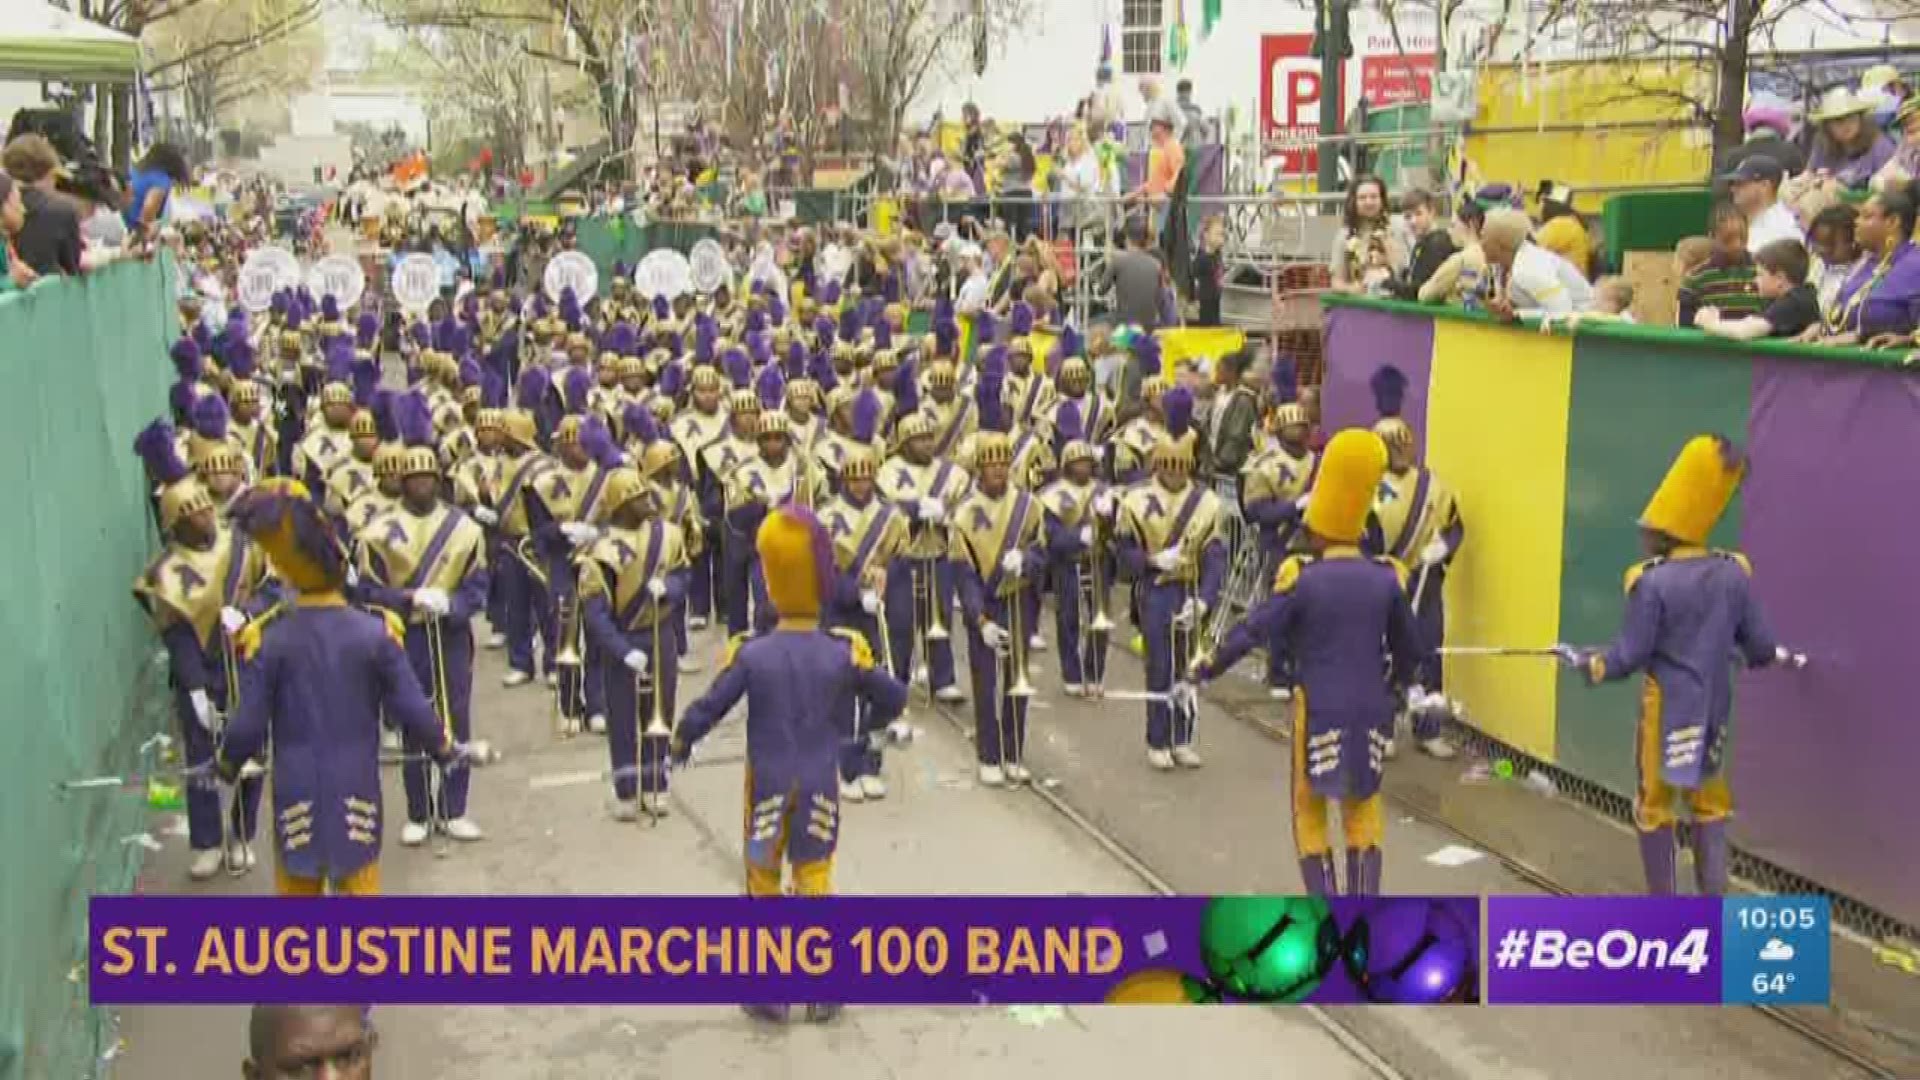 St. Augustine Marching Band, a fan-favorite high school band in New Orleans, marches in the Krewe of Zulu parade on Mardi Gras Day, Tuesday, Feb. 25 2020.